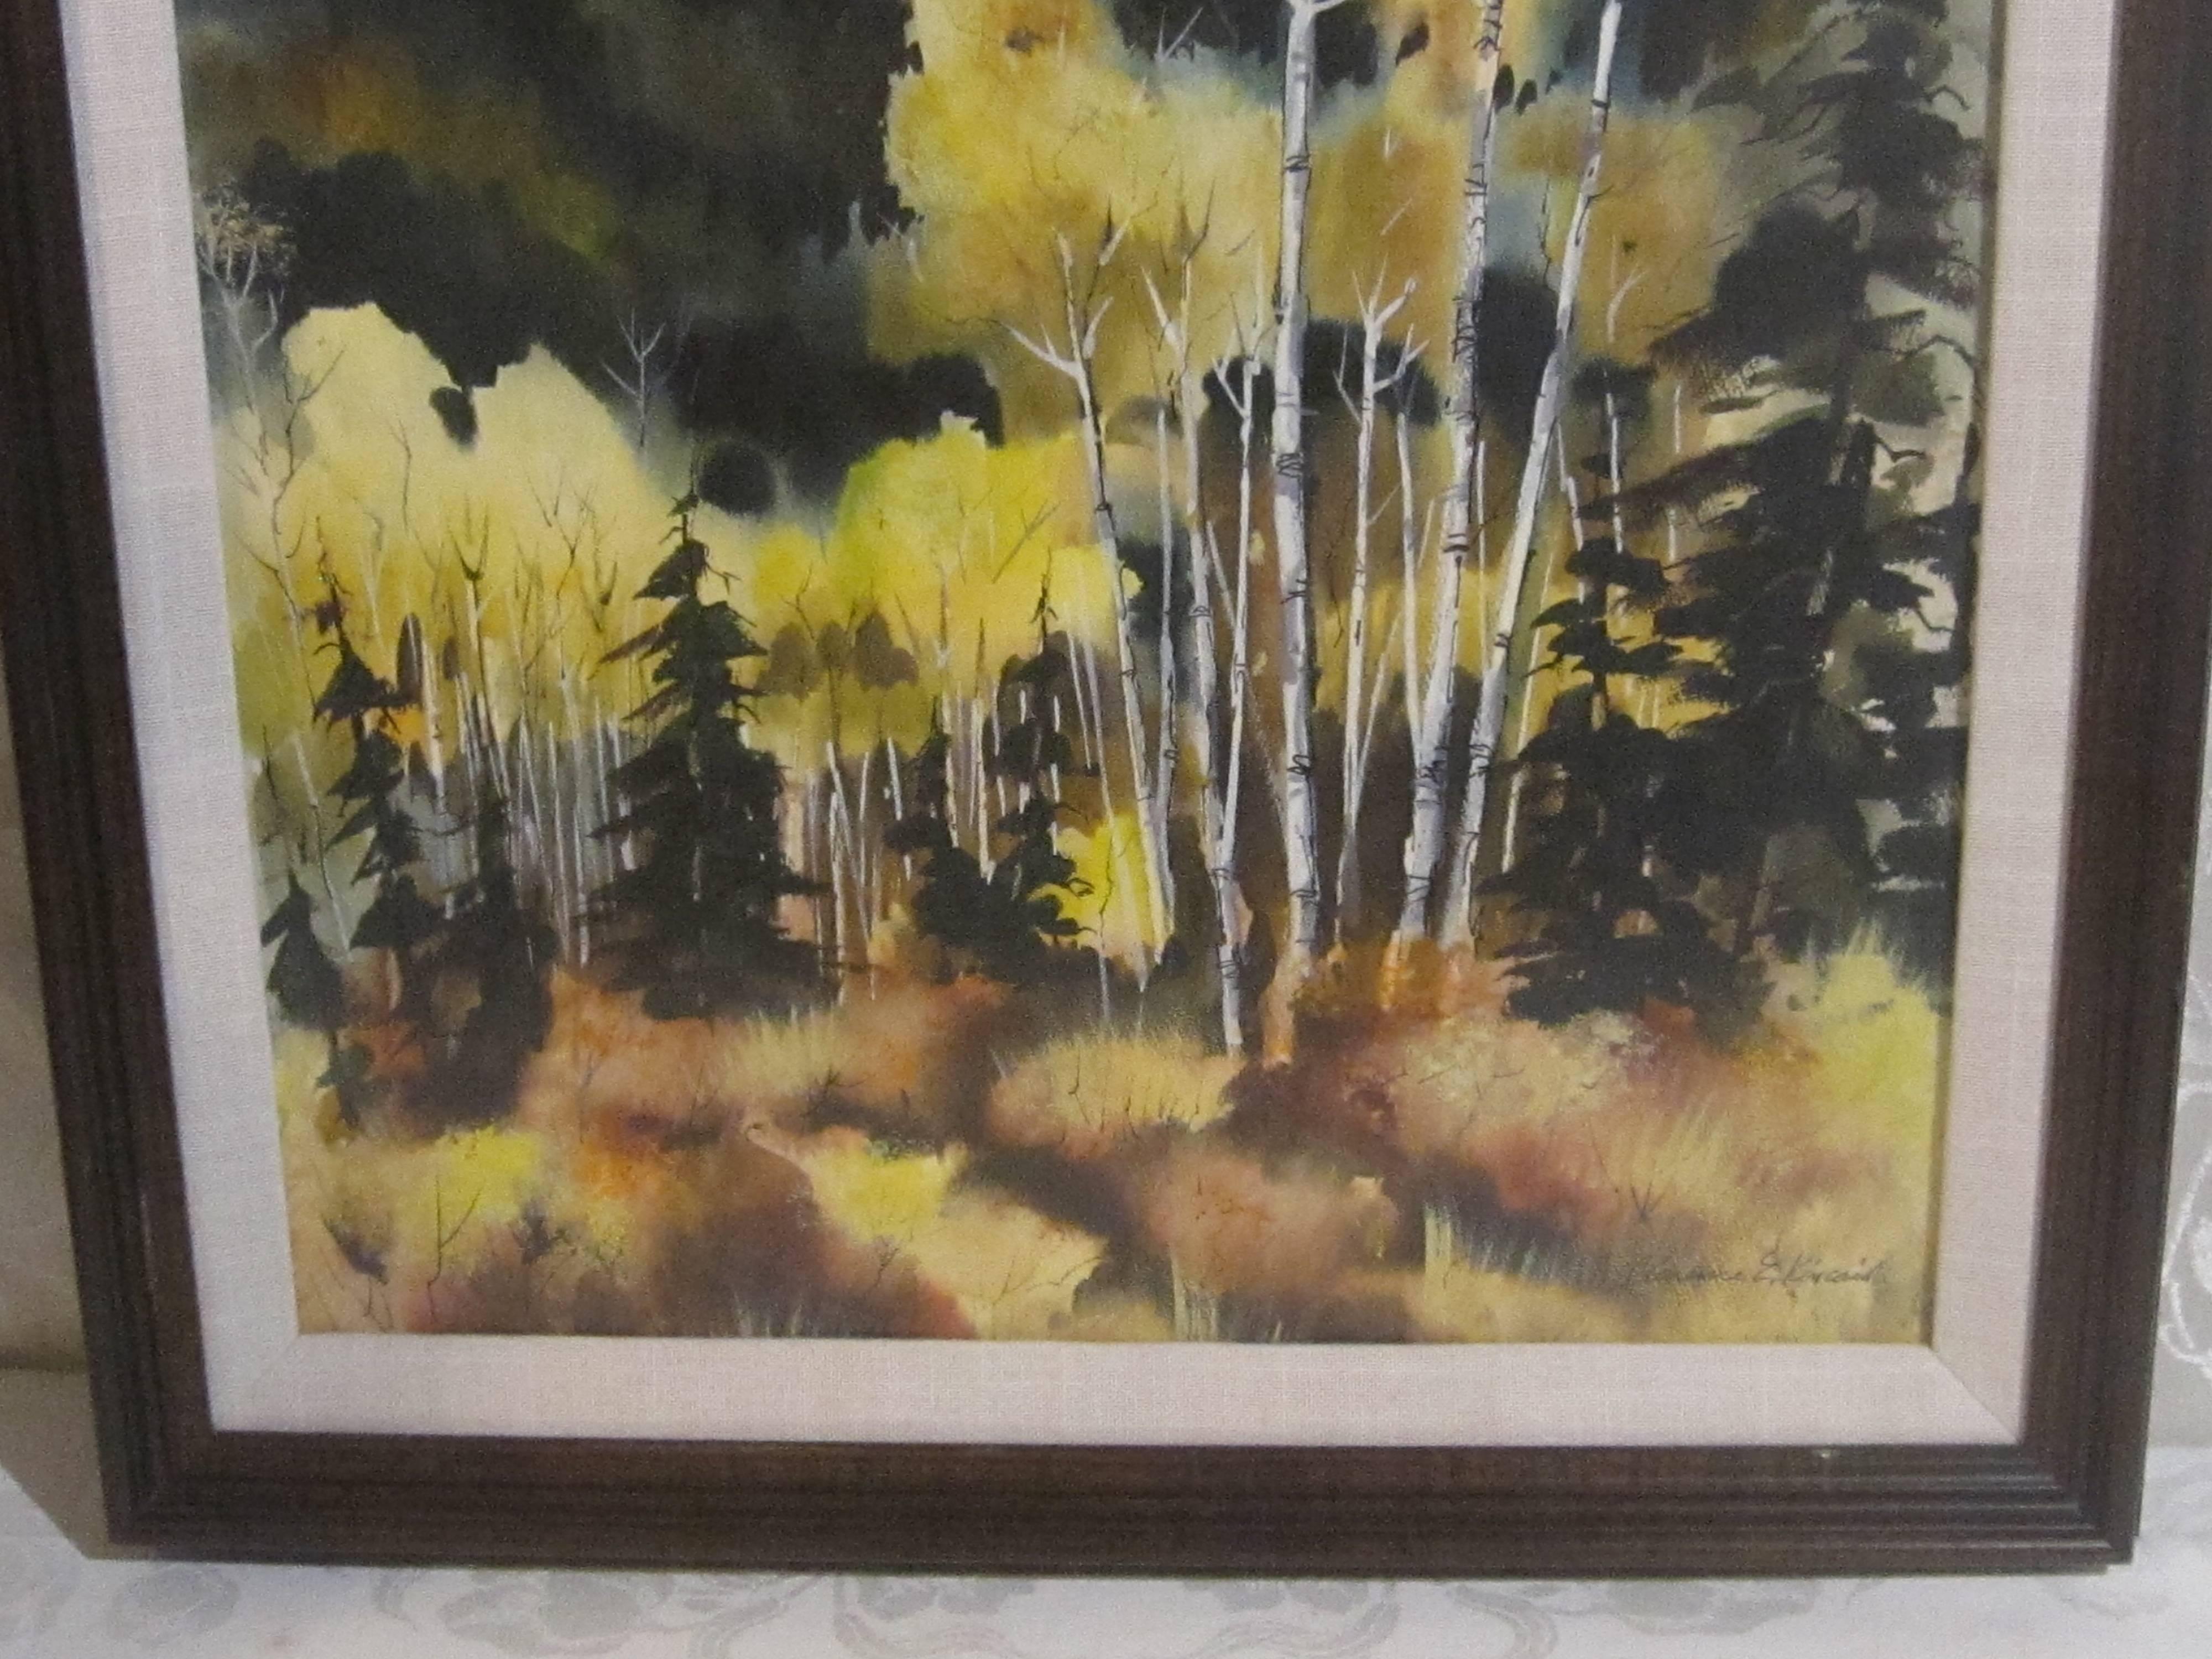 This is an original watercolor by Clarence Kincaid and signed in the lower right corner. It is a mountain scene depicting Aspens in the foreground. It is framed under non-glare glass.